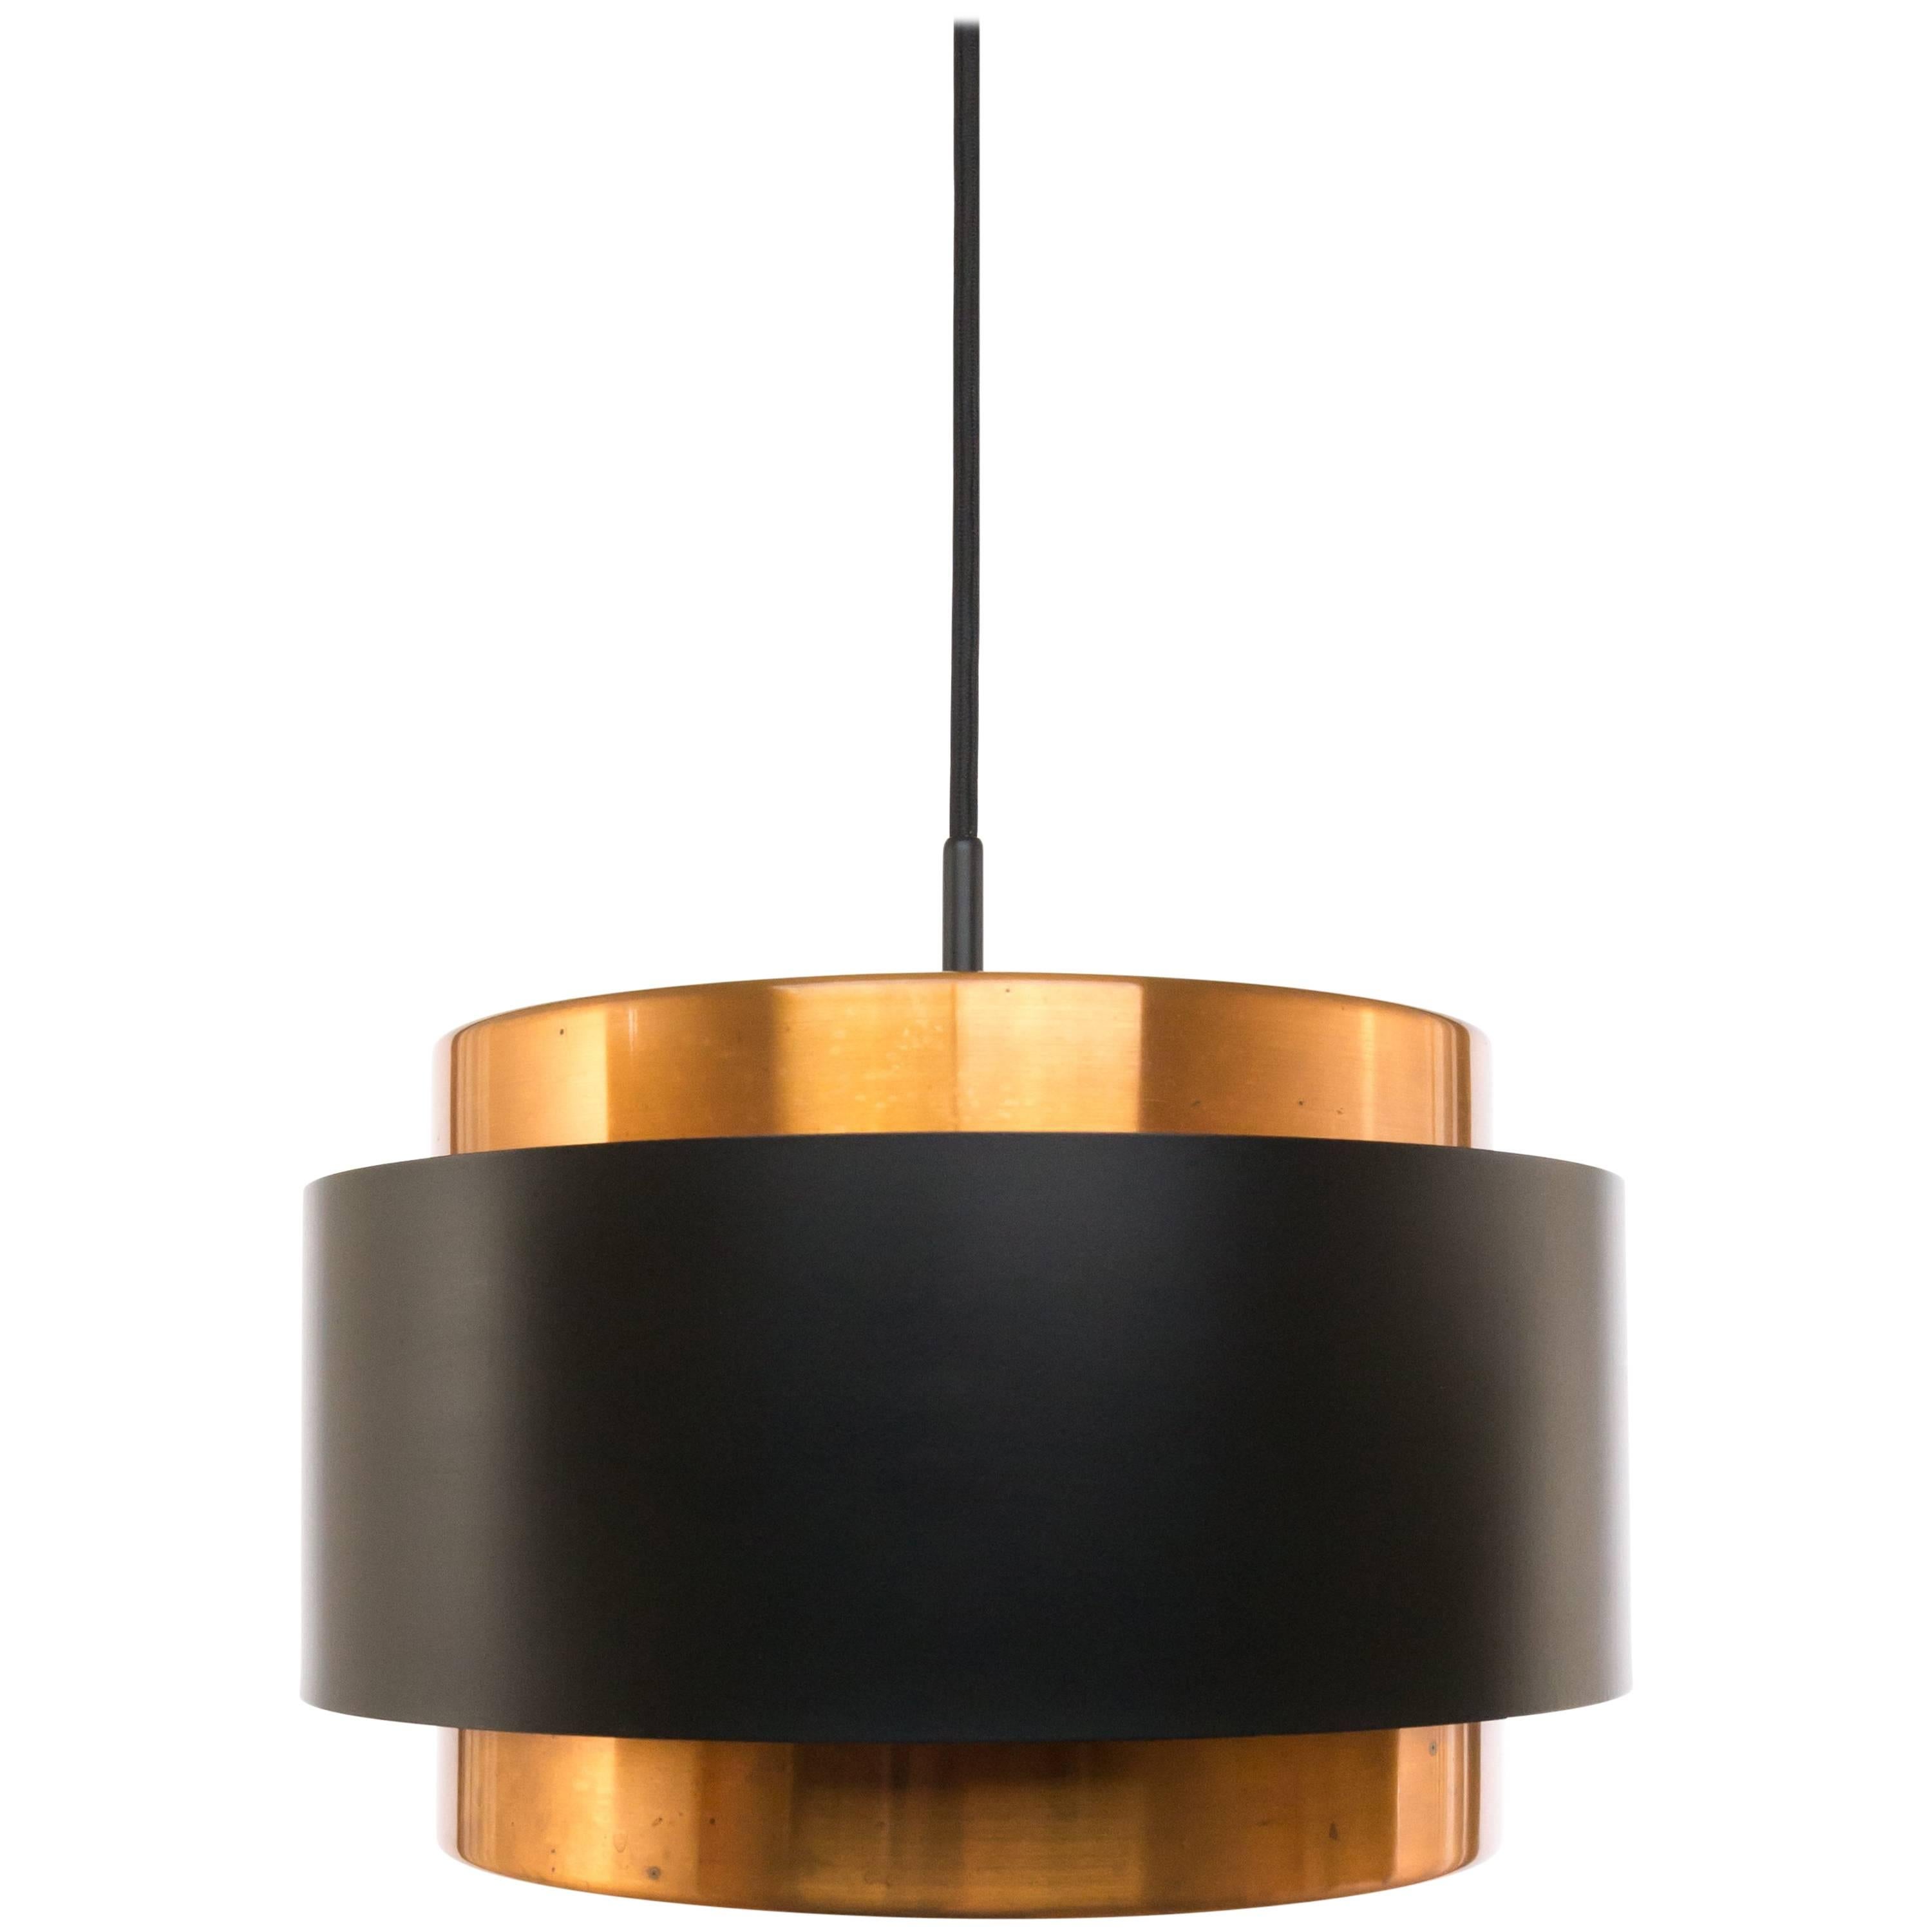 Pair of pendants named Saturn, designed by Danish designer Jo Hammerborg and manufactured by Fog & Mørup.

The lamp is a structure of two concentric cylindrical copper bands that are held together by a black lacquered band. At the top and the